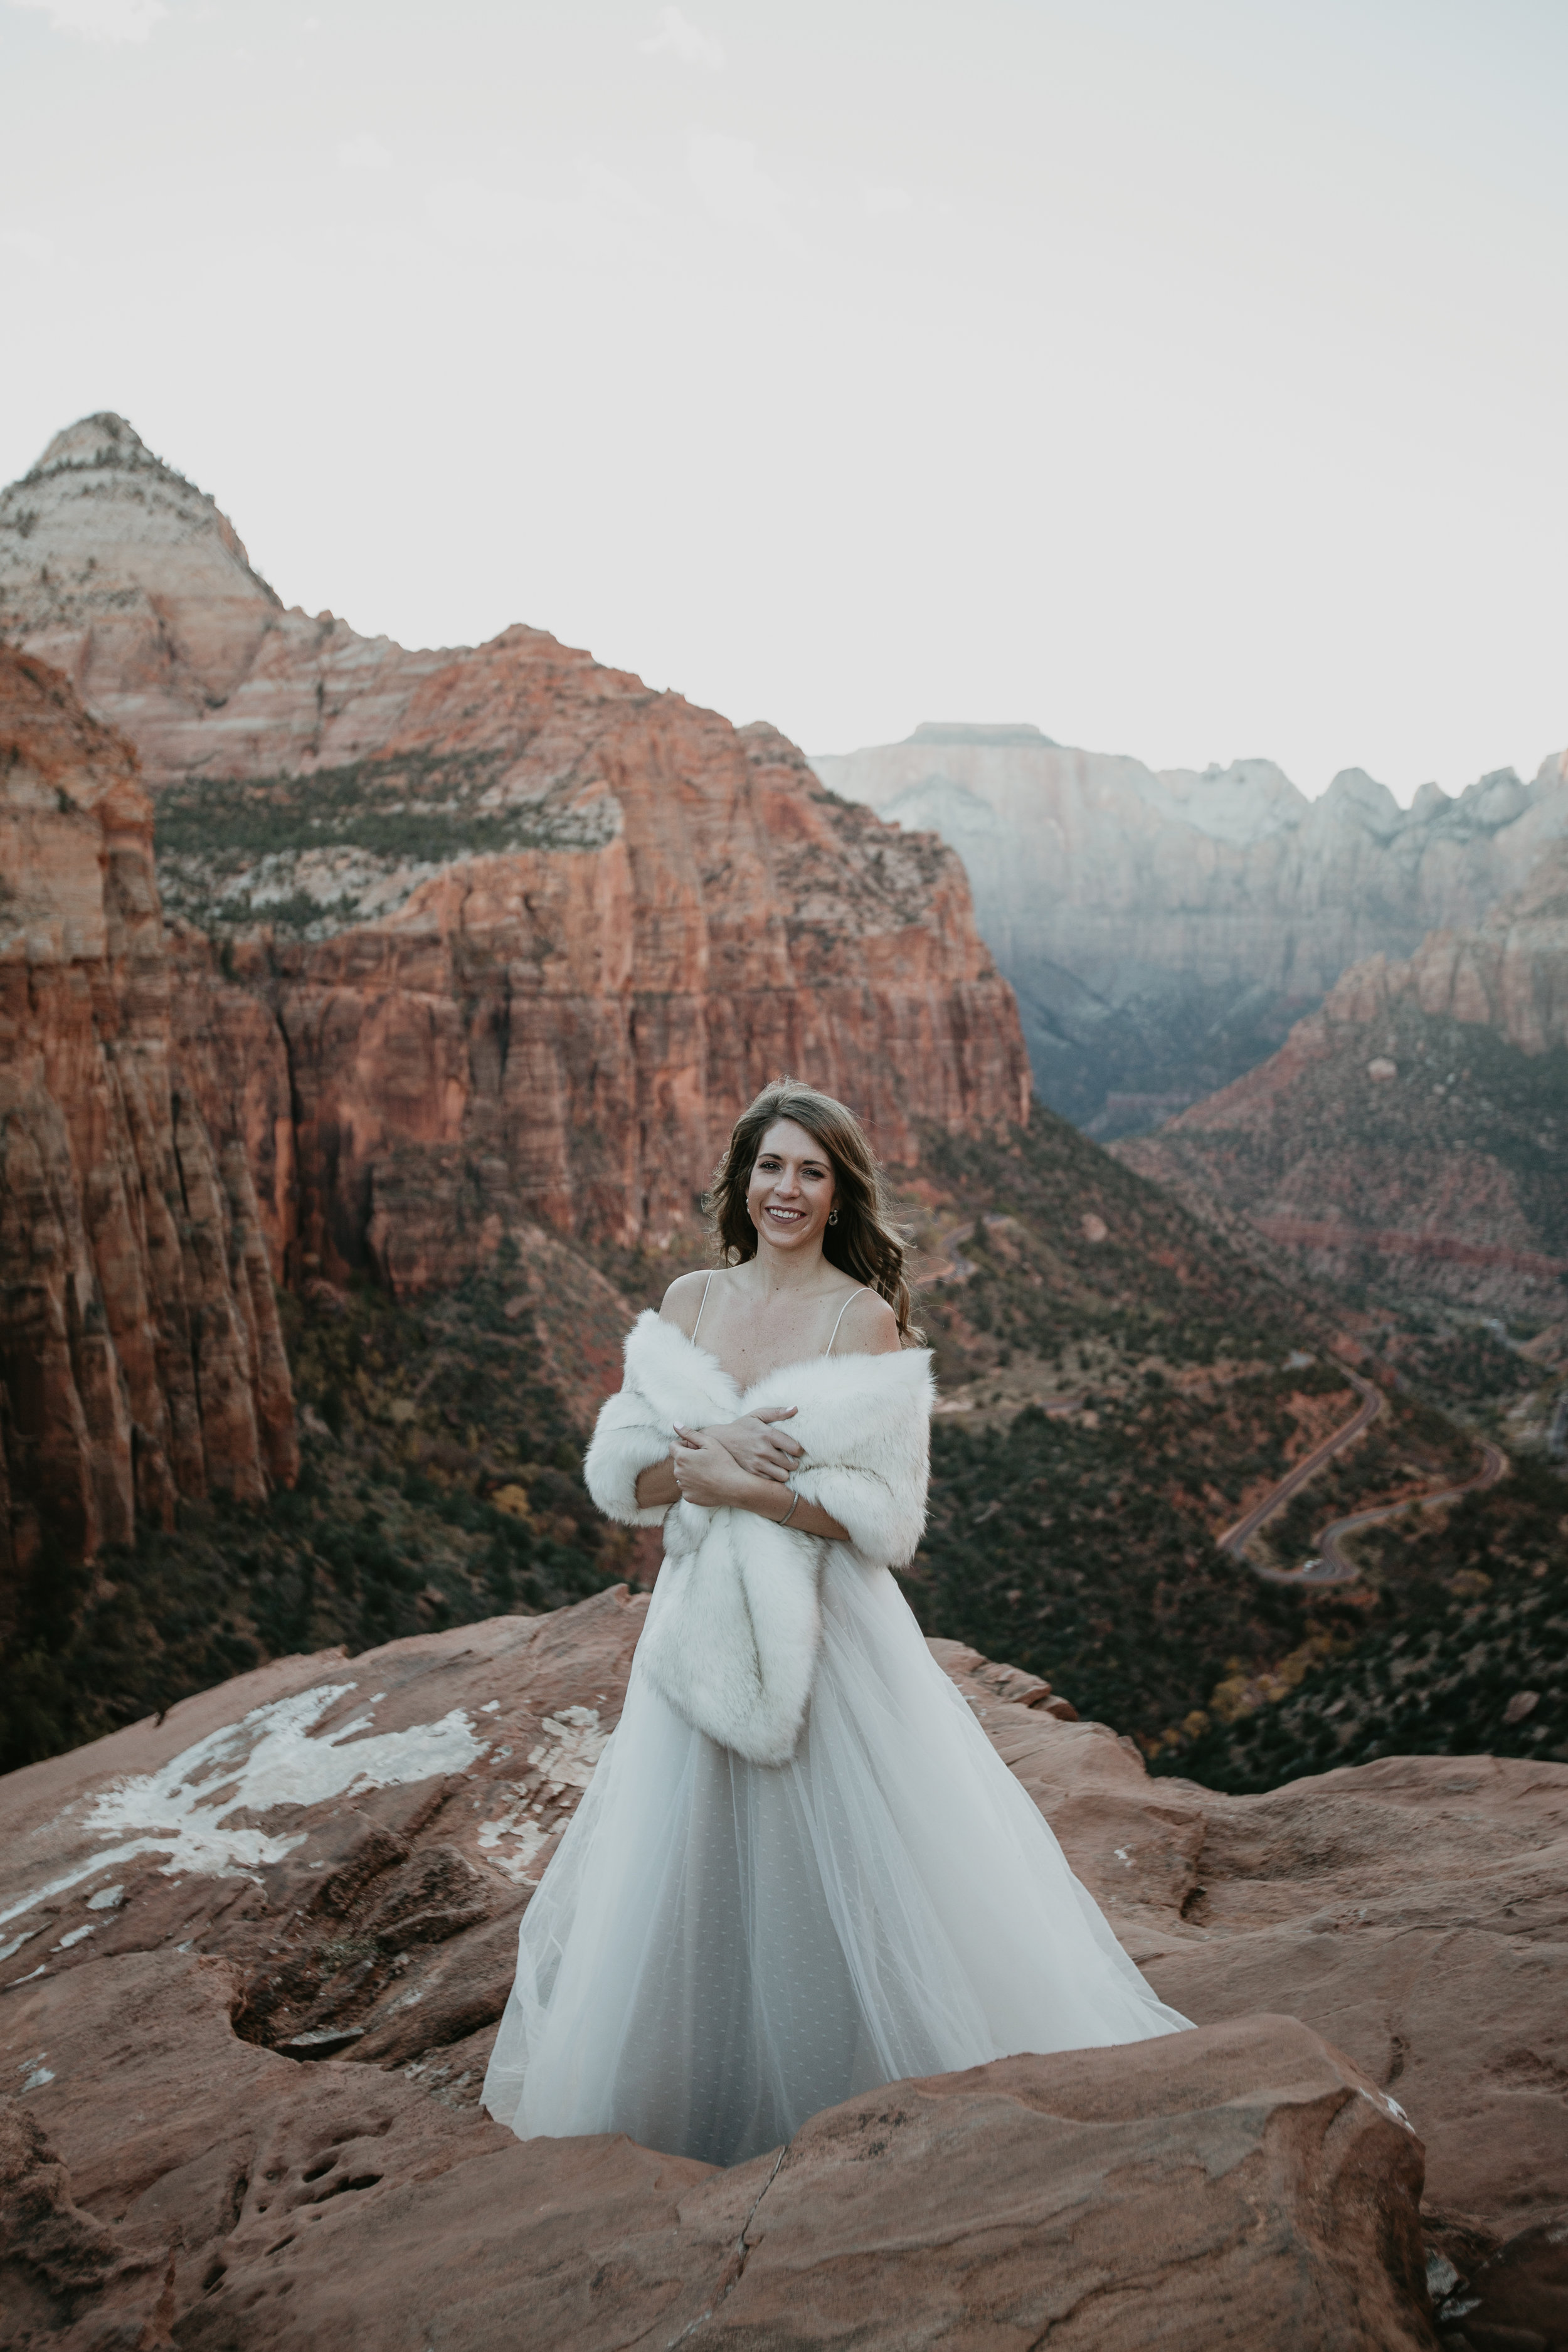 nicole-daacke-photography-zion-national-park-elopement-photographer-canyon-overlook-trail-elope-hiking-adventure-wedding-photos-fall-utah-red-rock-canyon-stgeorge-eloping-photographer-63.jpg